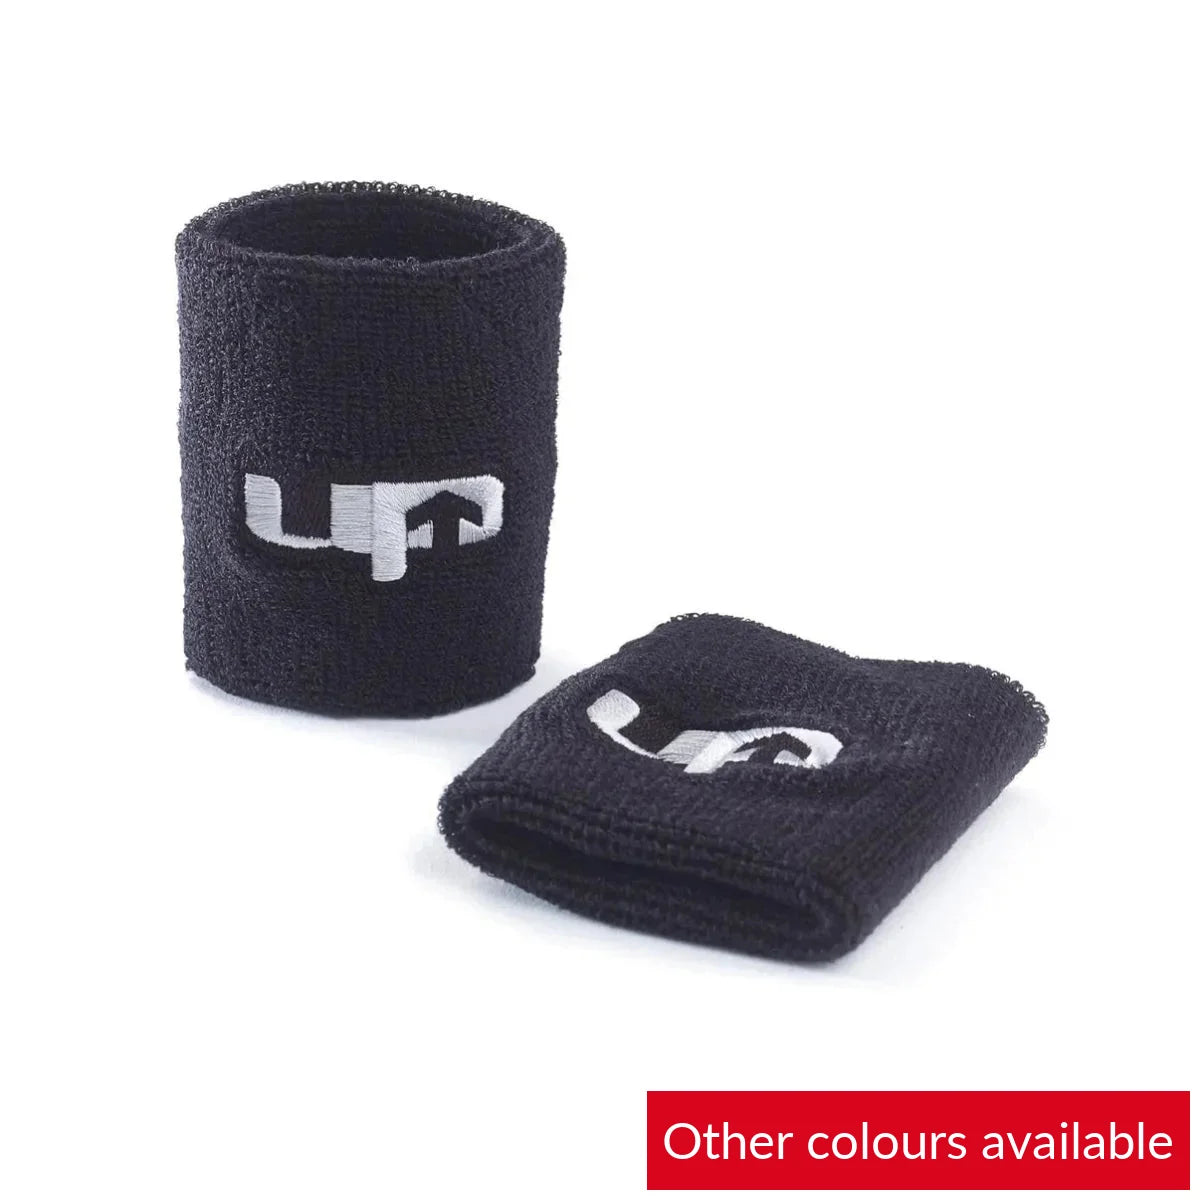 Ultimate Performance Wristbands